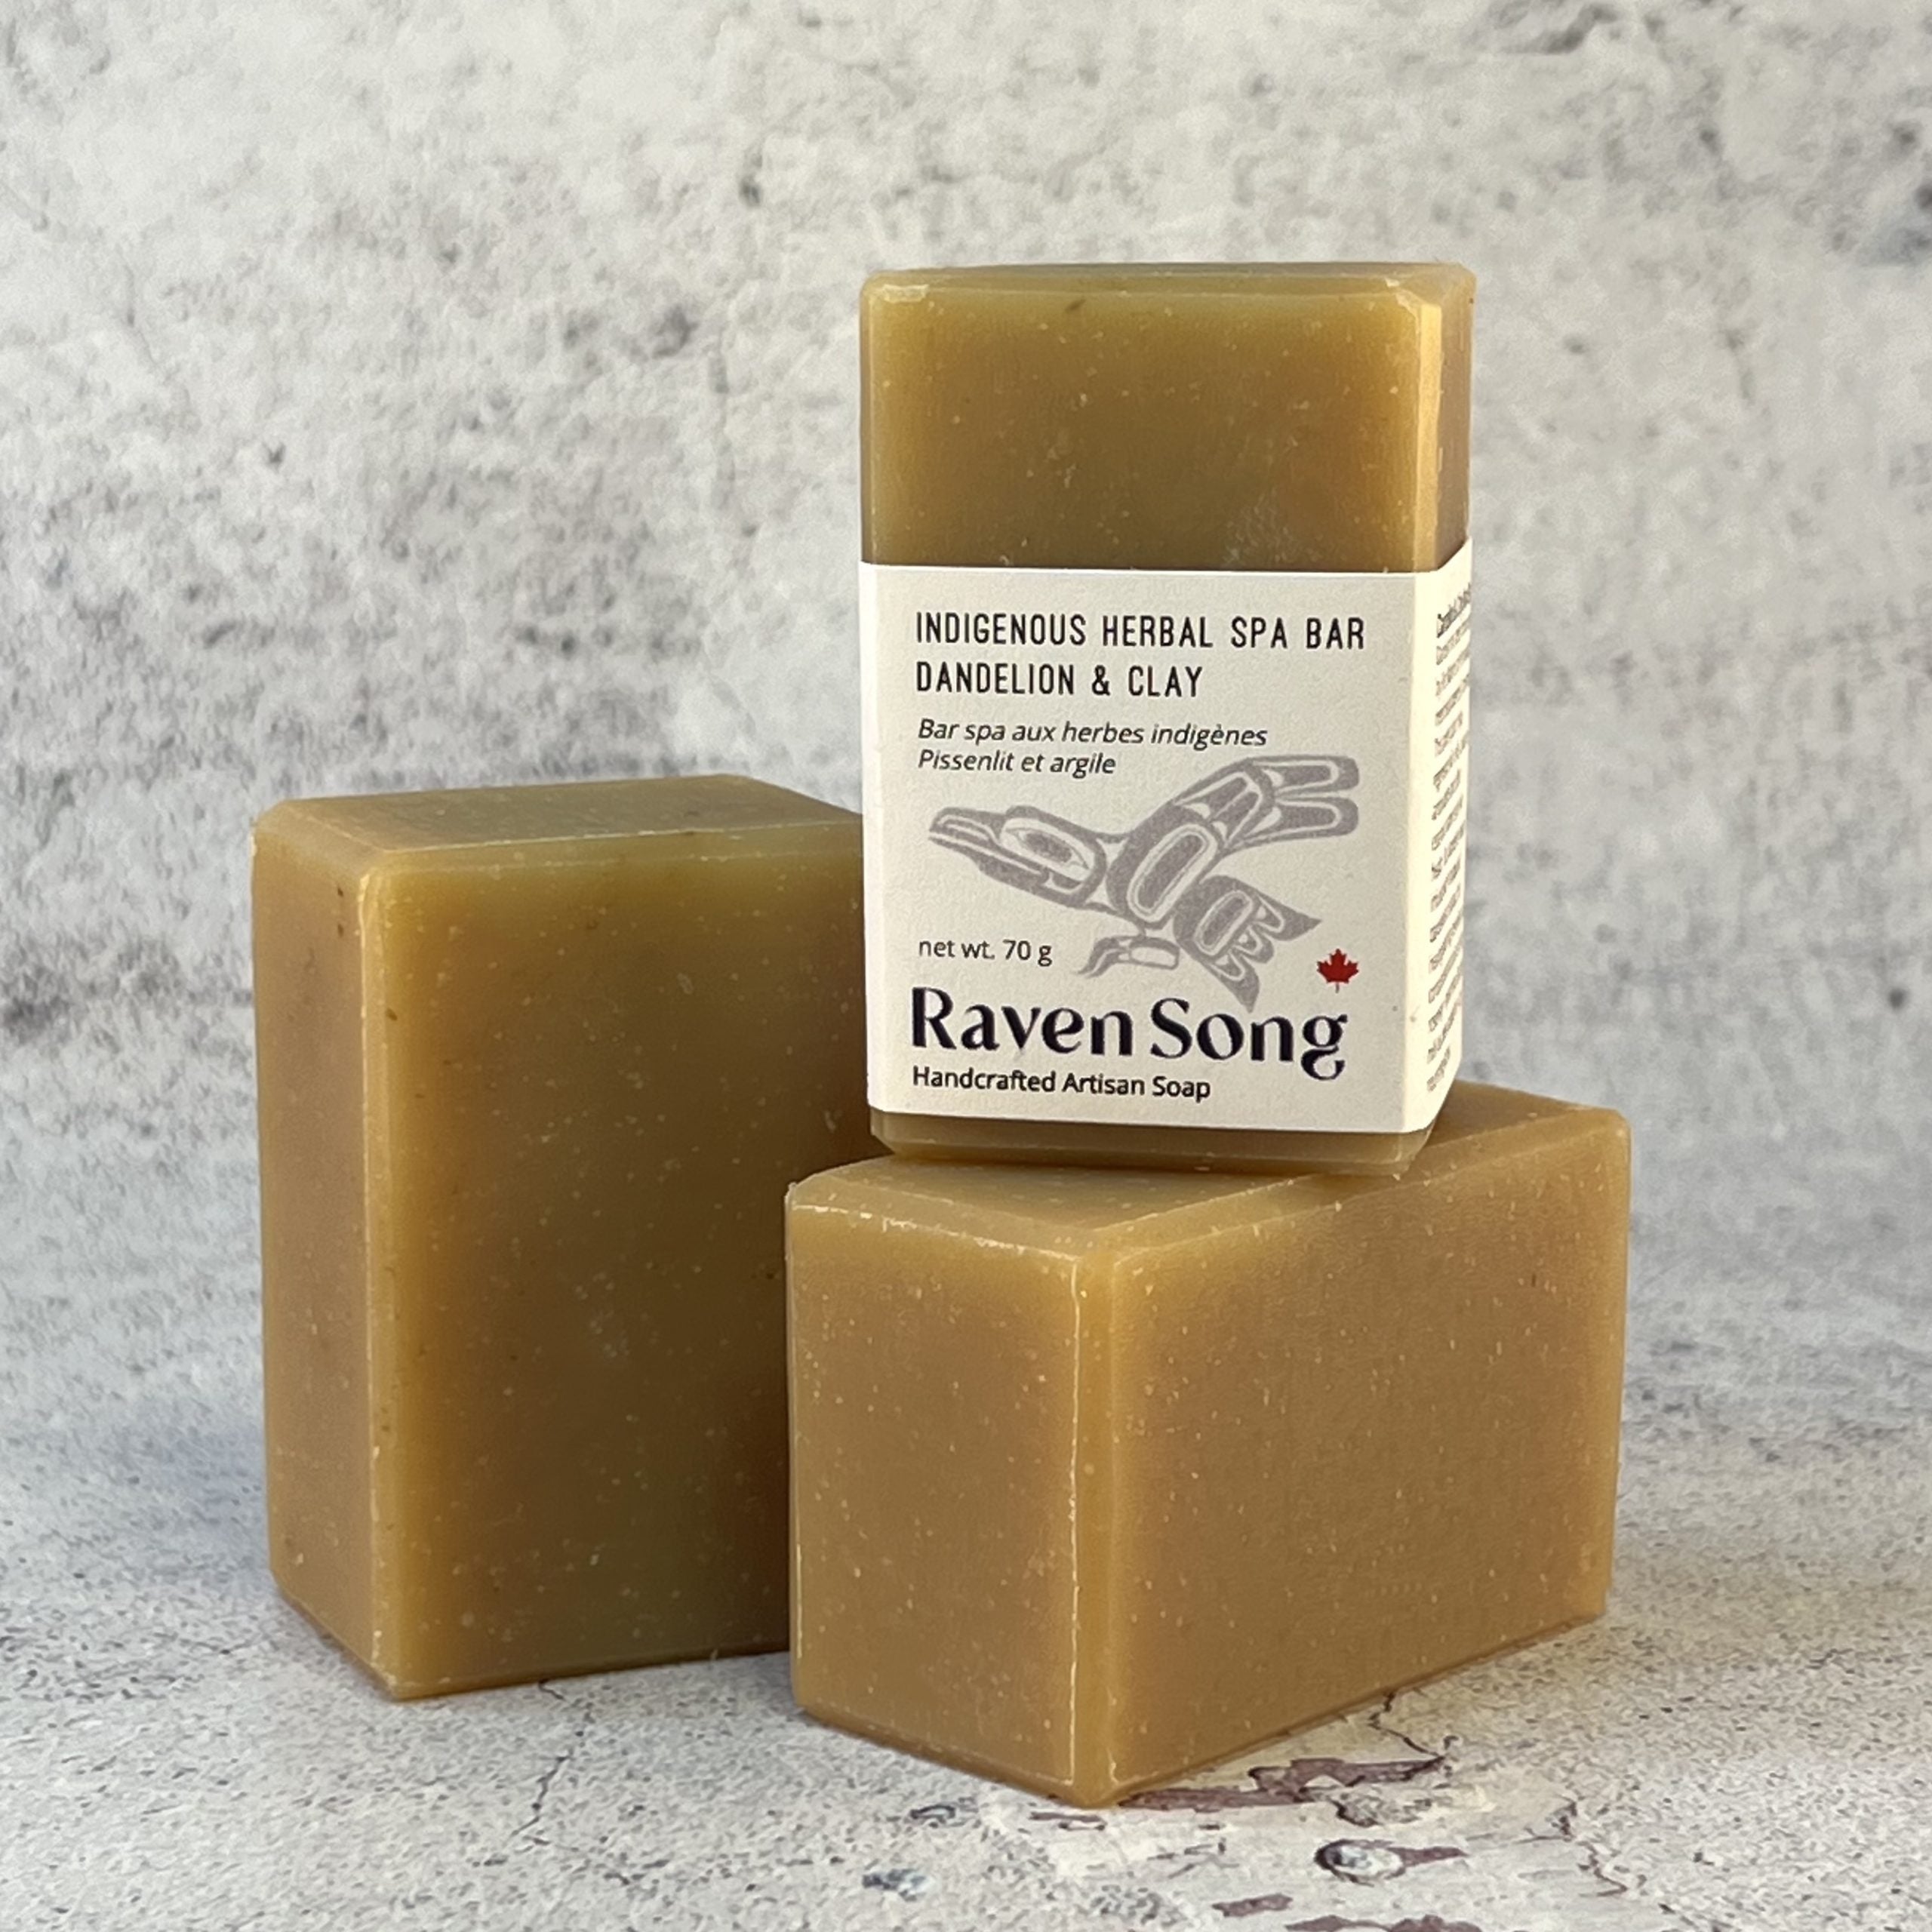 DANDELION & CLAY DELUXE ARTISAN SOAP - INDIGENOUS COLLECTION